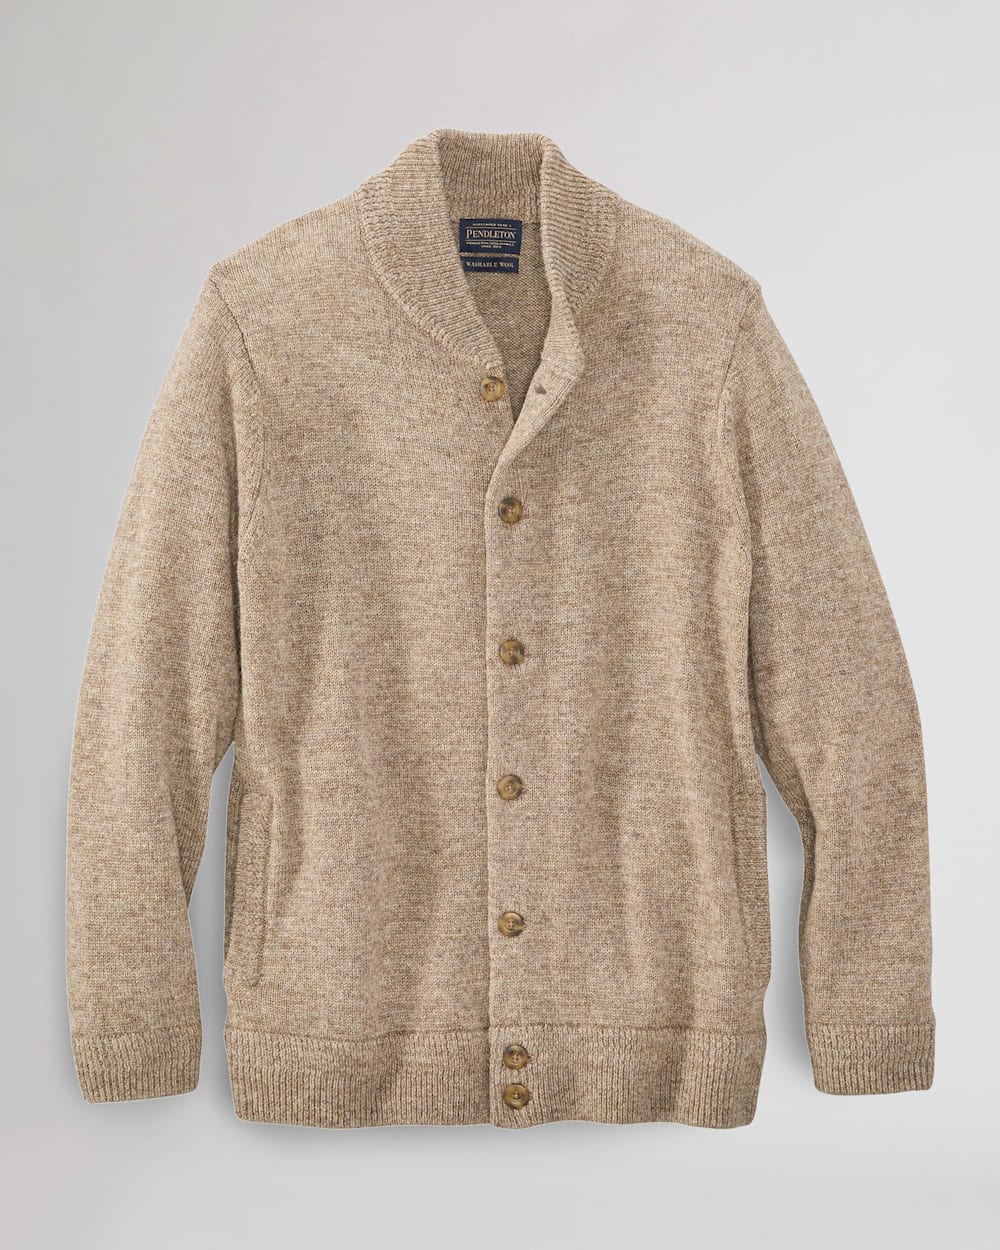 ALTERNATE VIEW OF MEN'S SHETLAND WASHABLE WOOL CARDIGAN IN COYOTE TAN HEATHER image number 7